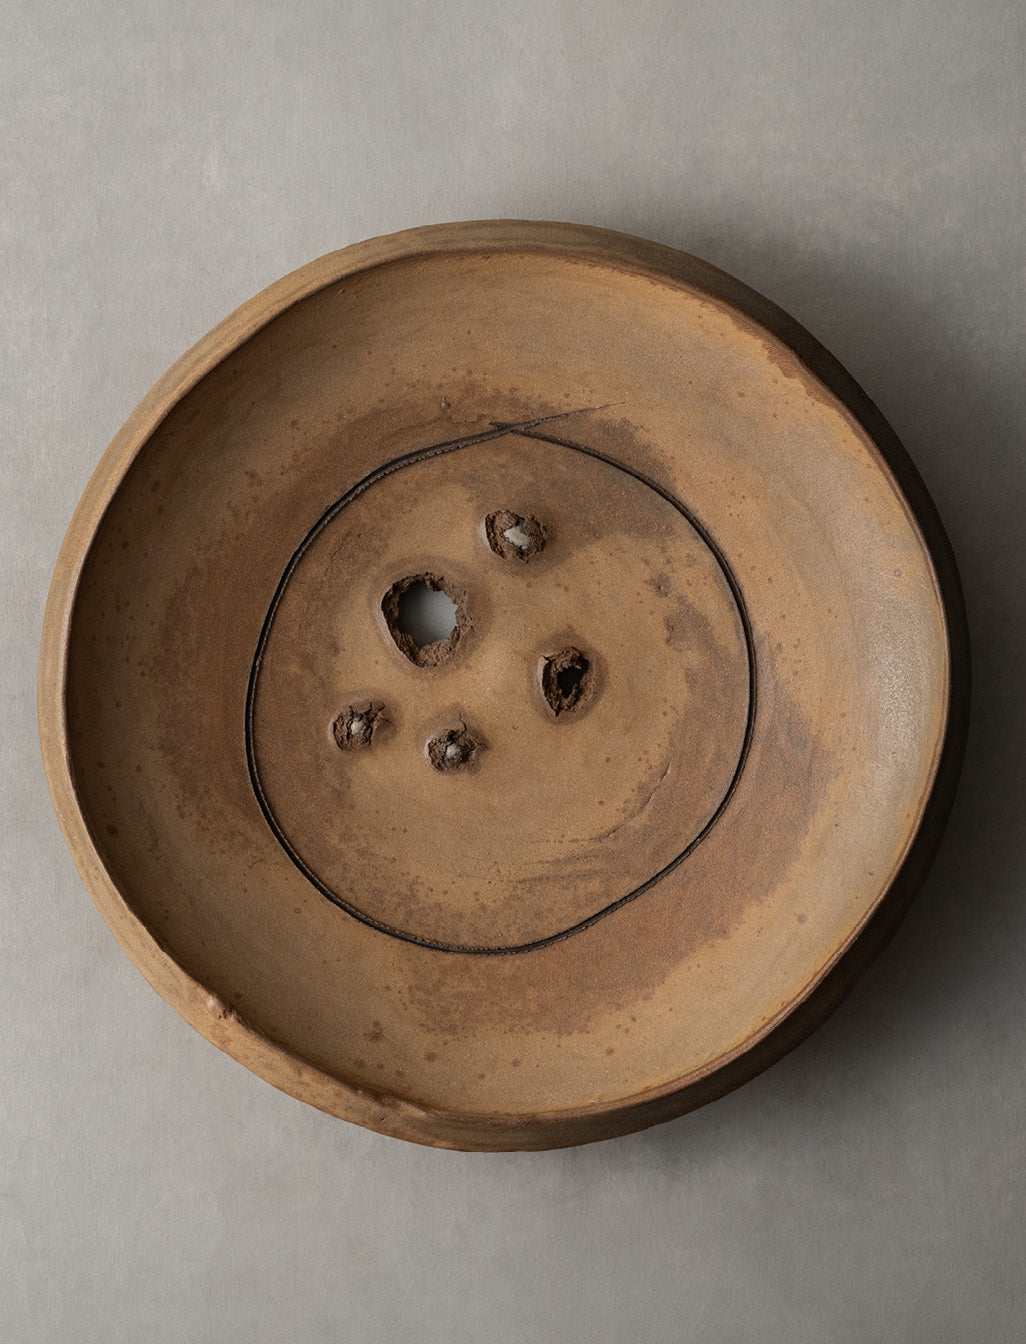 Peter Voulkos, Charger Plate, 1978 (PVFM02)